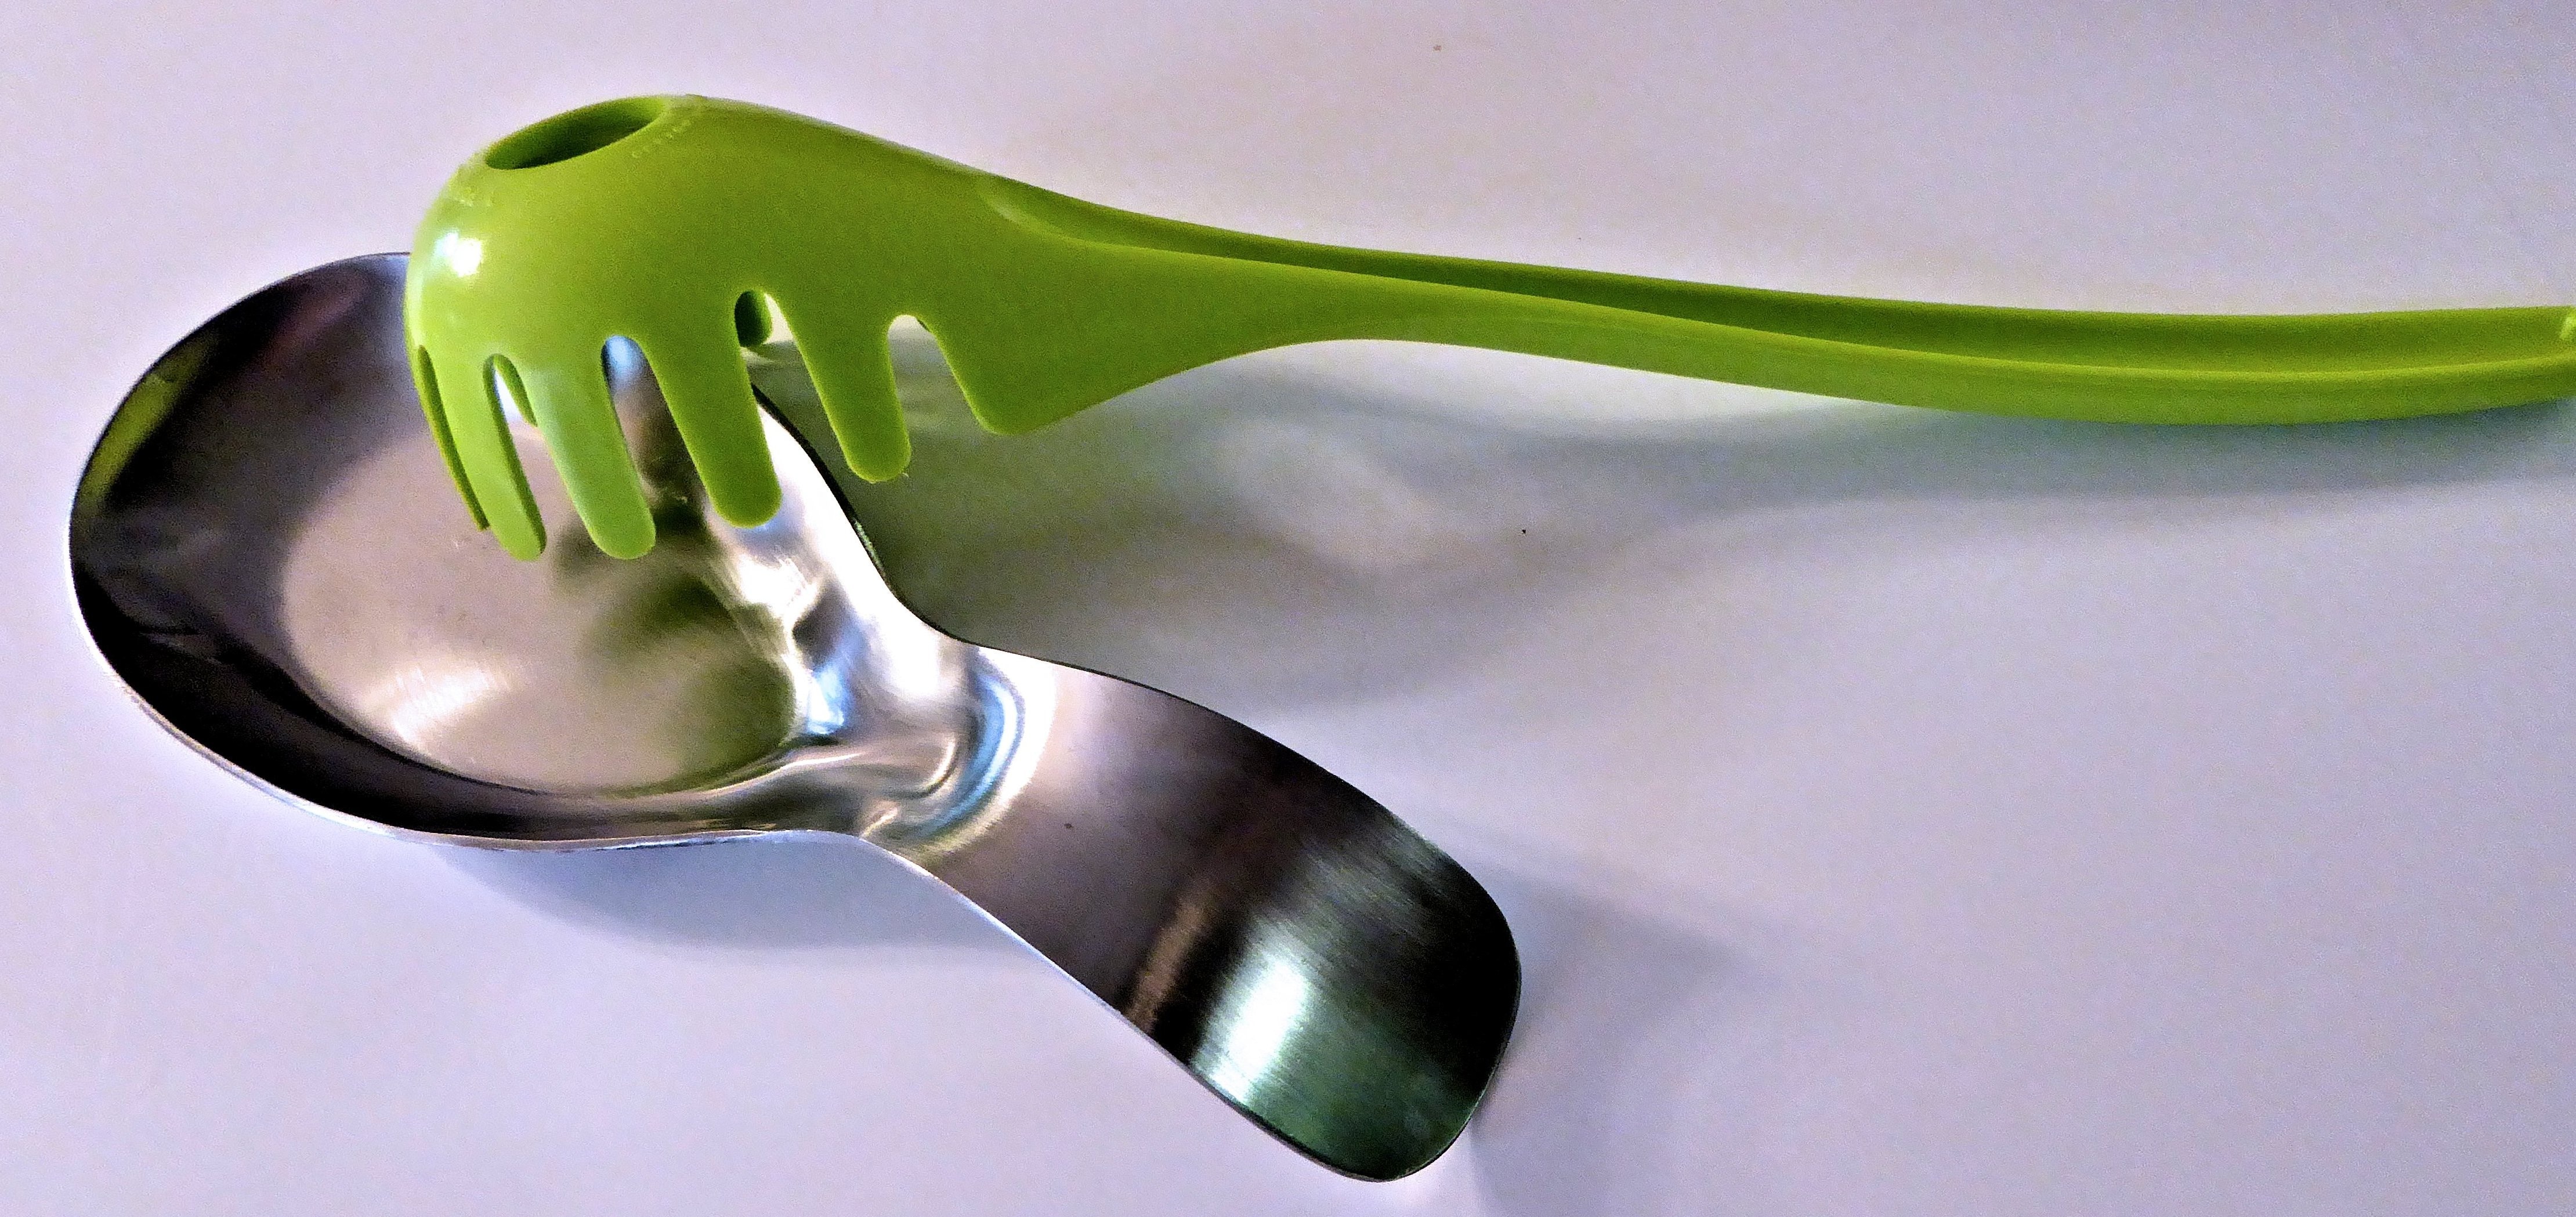 silver scoop and green plastic ladle